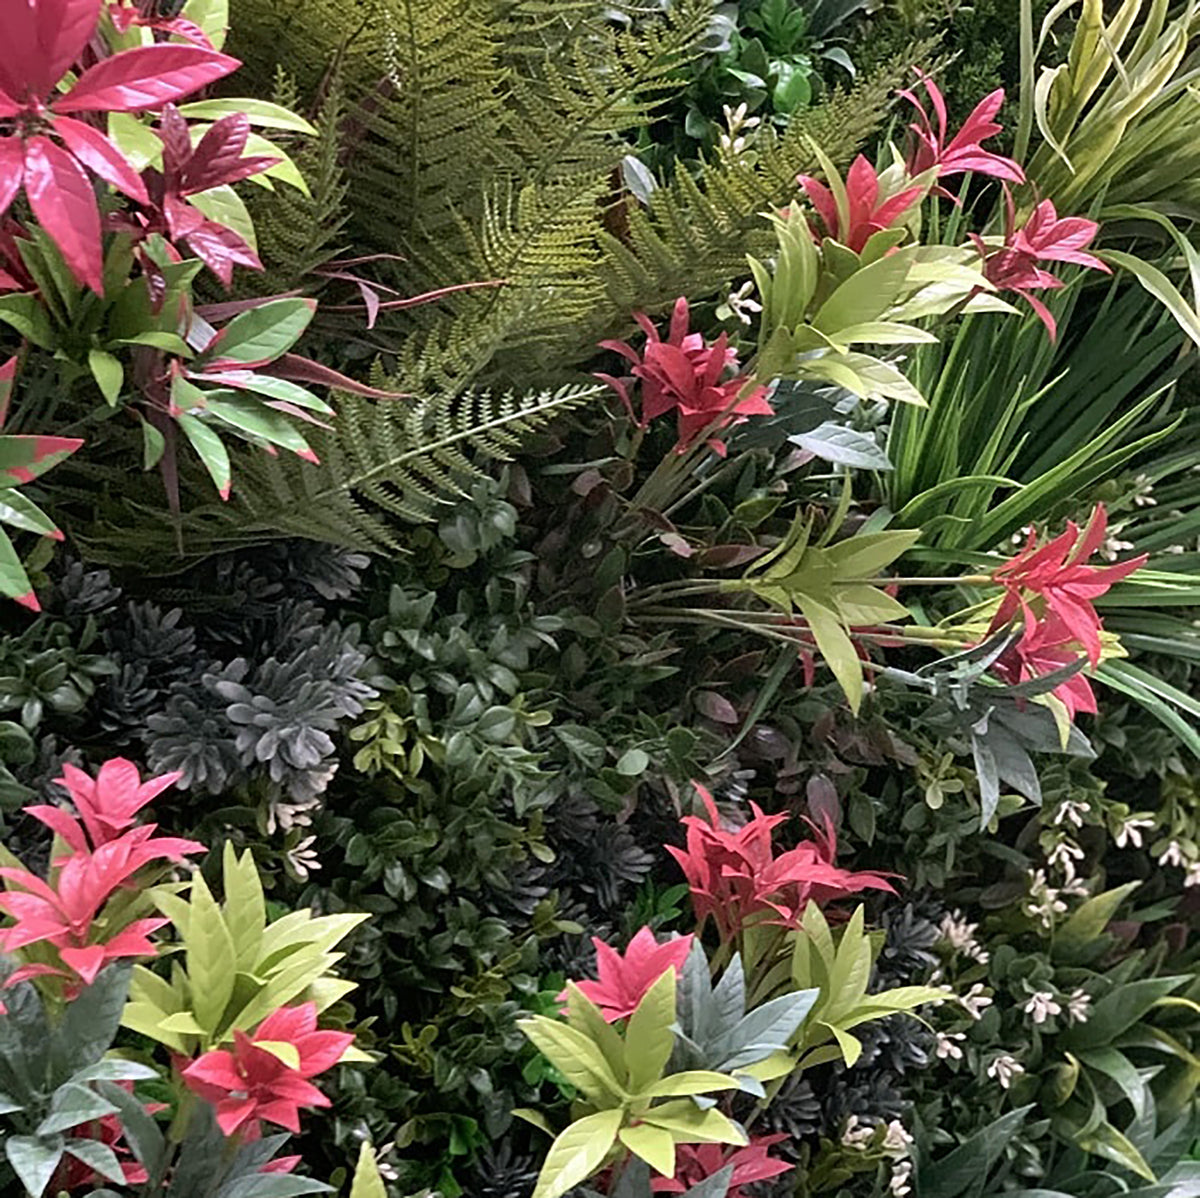 Invigorating reds blend with the green to create a stunning view. Use these lush plants where you please. they are designed to enhance or accent your wall by simply slotting them into the Vistafolia Panel where you want them.